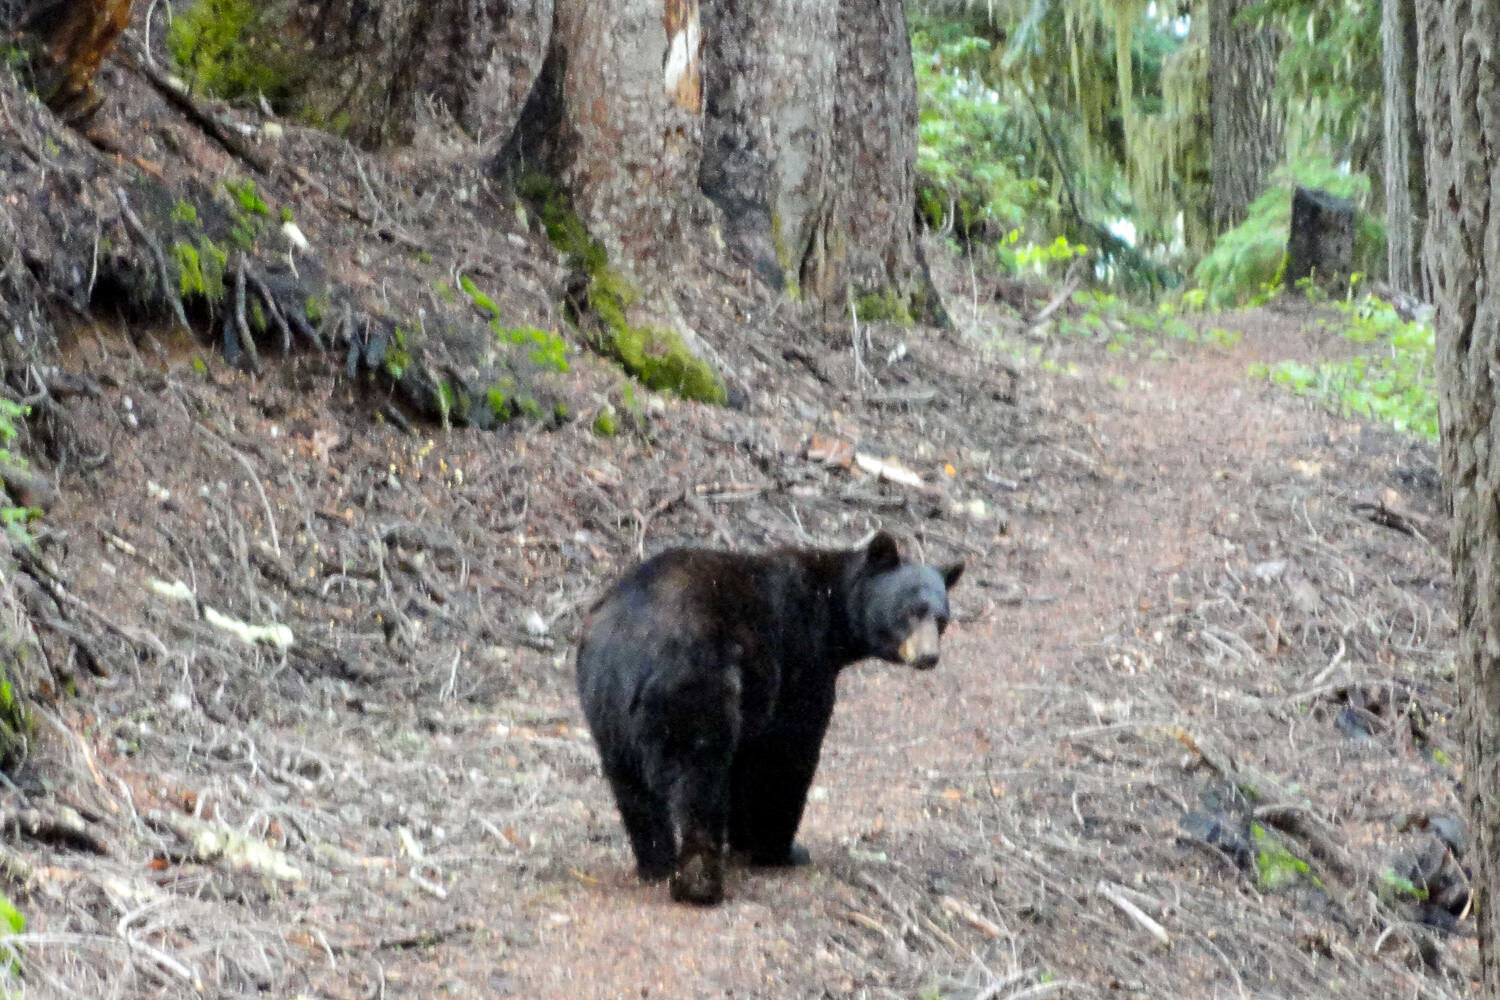 A black bear taking a stroll on the PCT in Central California